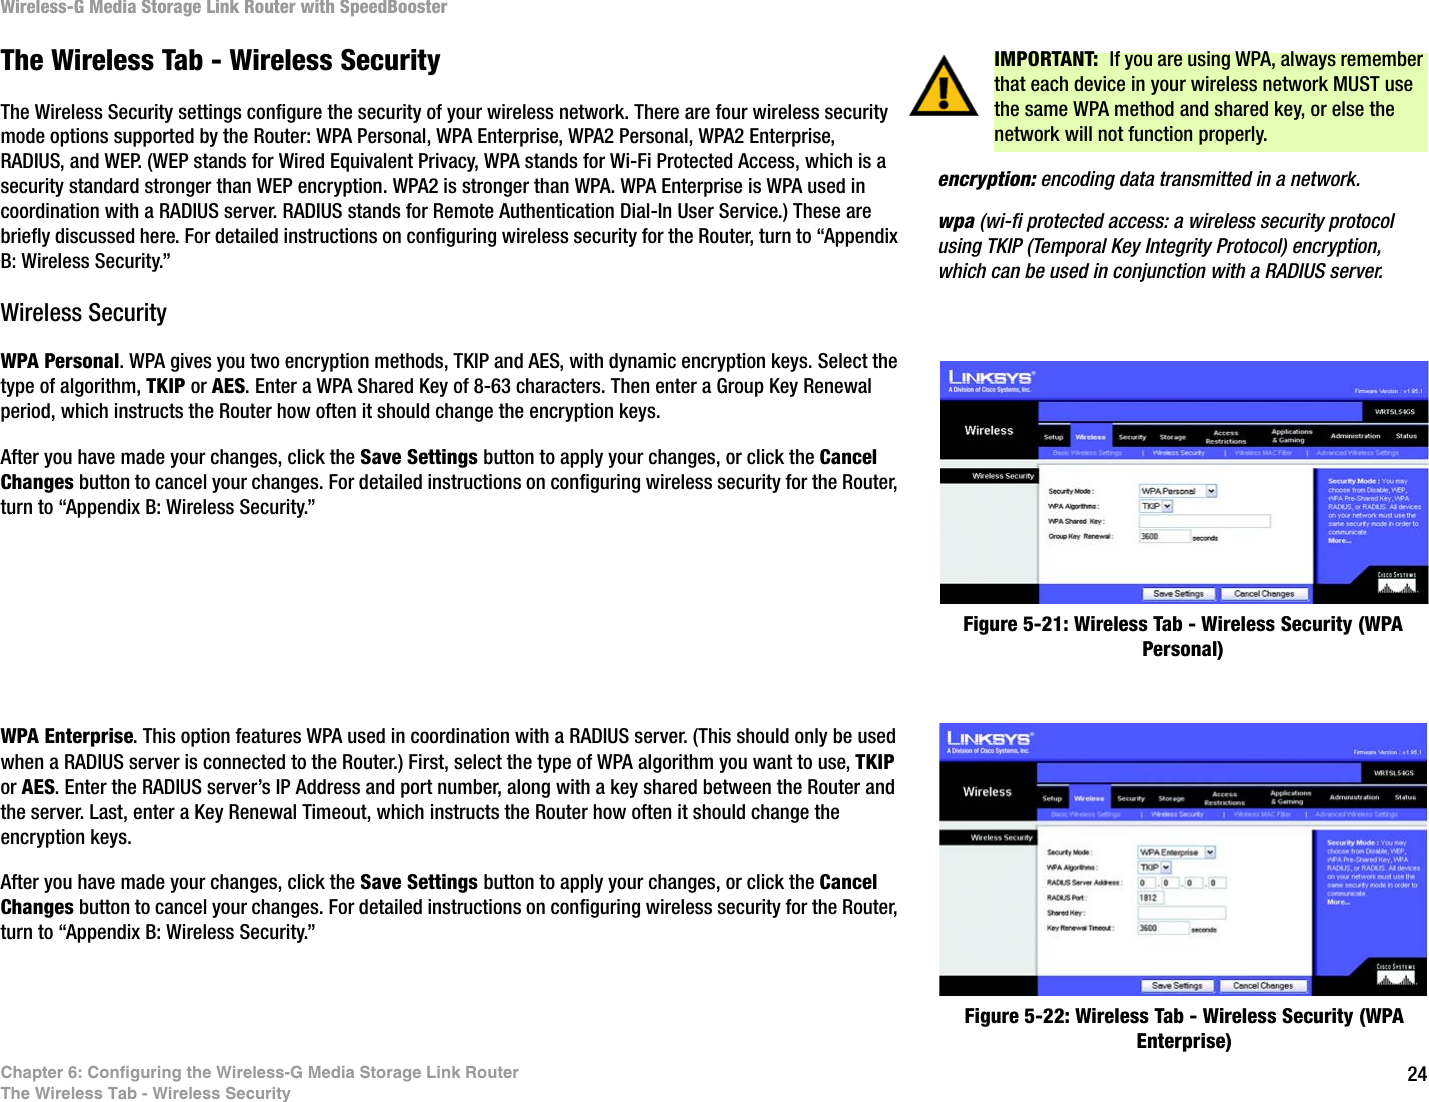 24Chapter 6: Configuring the Wireless-G Media Storage Link RouterThe Wireless Tab - Wireless SecurityWireless-G Media Storage Link Router with SpeedBoosterThe Wireless Tab - Wireless SecurityThe Wireless Security settings configure the security of your wireless network. There are four wireless security mode options supported by the Router: WPA Personal, WPA Enterprise, WPA2 Personal, WPA2 Enterprise, RADIUS, and WEP. (WEP stands for Wired Equivalent Privacy, WPA stands for Wi-Fi Protected Access, which is a security standard stronger than WEP encryption. WPA2 is stronger than WPA. WPA Enterprise is WPA used in coordination with a RADIUS server. RADIUS stands for Remote Authentication Dial-In User Service.) These are briefly discussed here. For detailed instructions on configuring wireless security for the Router, turn to “Appendix B: Wireless Security.”Wireless SecurityWPA Personal. WPA gives you two encryption methods, TKIP and AES, with dynamic encryption keys. Select the type of algorithm, TKIP or AES. Enter a WPA Shared Key of 8-63 characters. Then enter a Group Key Renewal period, which instructs the Router how often it should change the encryption keys.After you have made your changes, click the Save Settings button to apply your changes, or click the Cancel Changes button to cancel your changes. For detailed instructions on configuring wireless security for the Router, turn to “Appendix B: Wireless Security.”WPA Enterprise. This option features WPA used in coordination with a RADIUS server. (This should only be used when a RADIUS server is connected to the Router.) First, select the type of WPA algorithm you want to use, TKIP or AES. Enter the RADIUS server’s IP Address and port number, along with a key shared between the Router and the server. Last, enter a Key Renewal Timeout, which instructs the Router how often it should change the encryption keys.After you have made your changes, click the Save Settings button to apply your changes, or click the Cancel Changes button to cancel your changes. For detailed instructions on configuring wireless security for the Router, turn to “Appendix B: Wireless Security.”Figure 5-21: Wireless Tab - Wireless Security (WPA Personal)Figure 5-22: Wireless Tab - Wireless Security (WPA Enterprise)IMPORTANT:  If you are using WPA, always remember that each device in your wireless network MUST use the same WPA method and shared key, or else the network will not function properly.wpa (wi-fi protected access: a wireless security protocol using TKIP (Temporal Key Integrity Protocol) encryption, which can be used in conjunction with a RADIUS server.encryption: encoding data transmitted in a network.